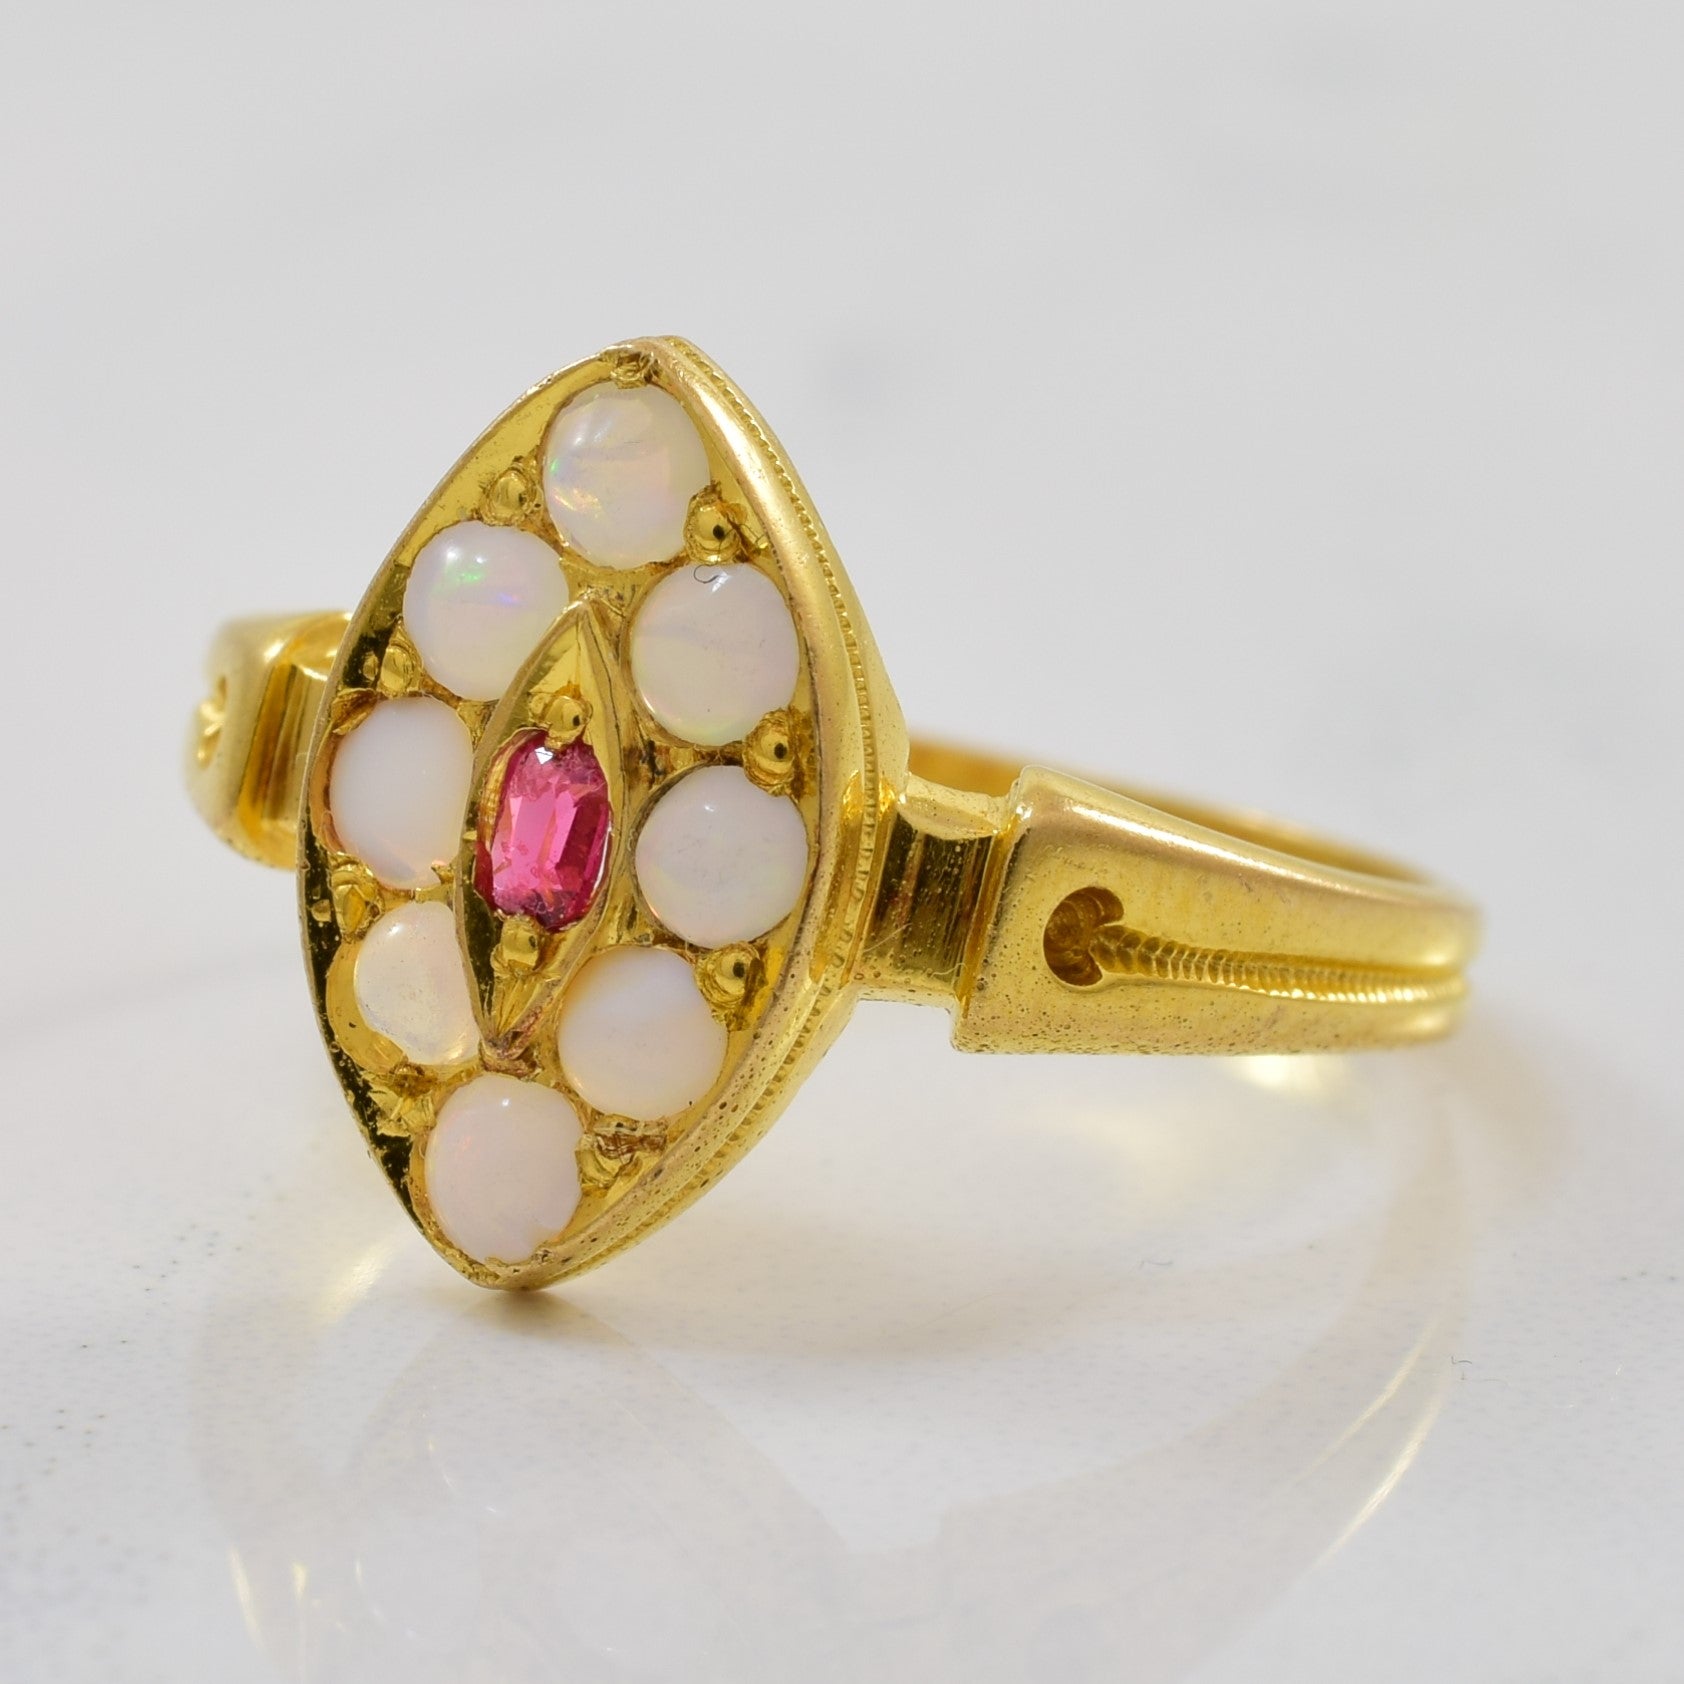 1870s Opal & Spinel Ring | 0.32ctw, 0.04ct | SZ 6.25 |